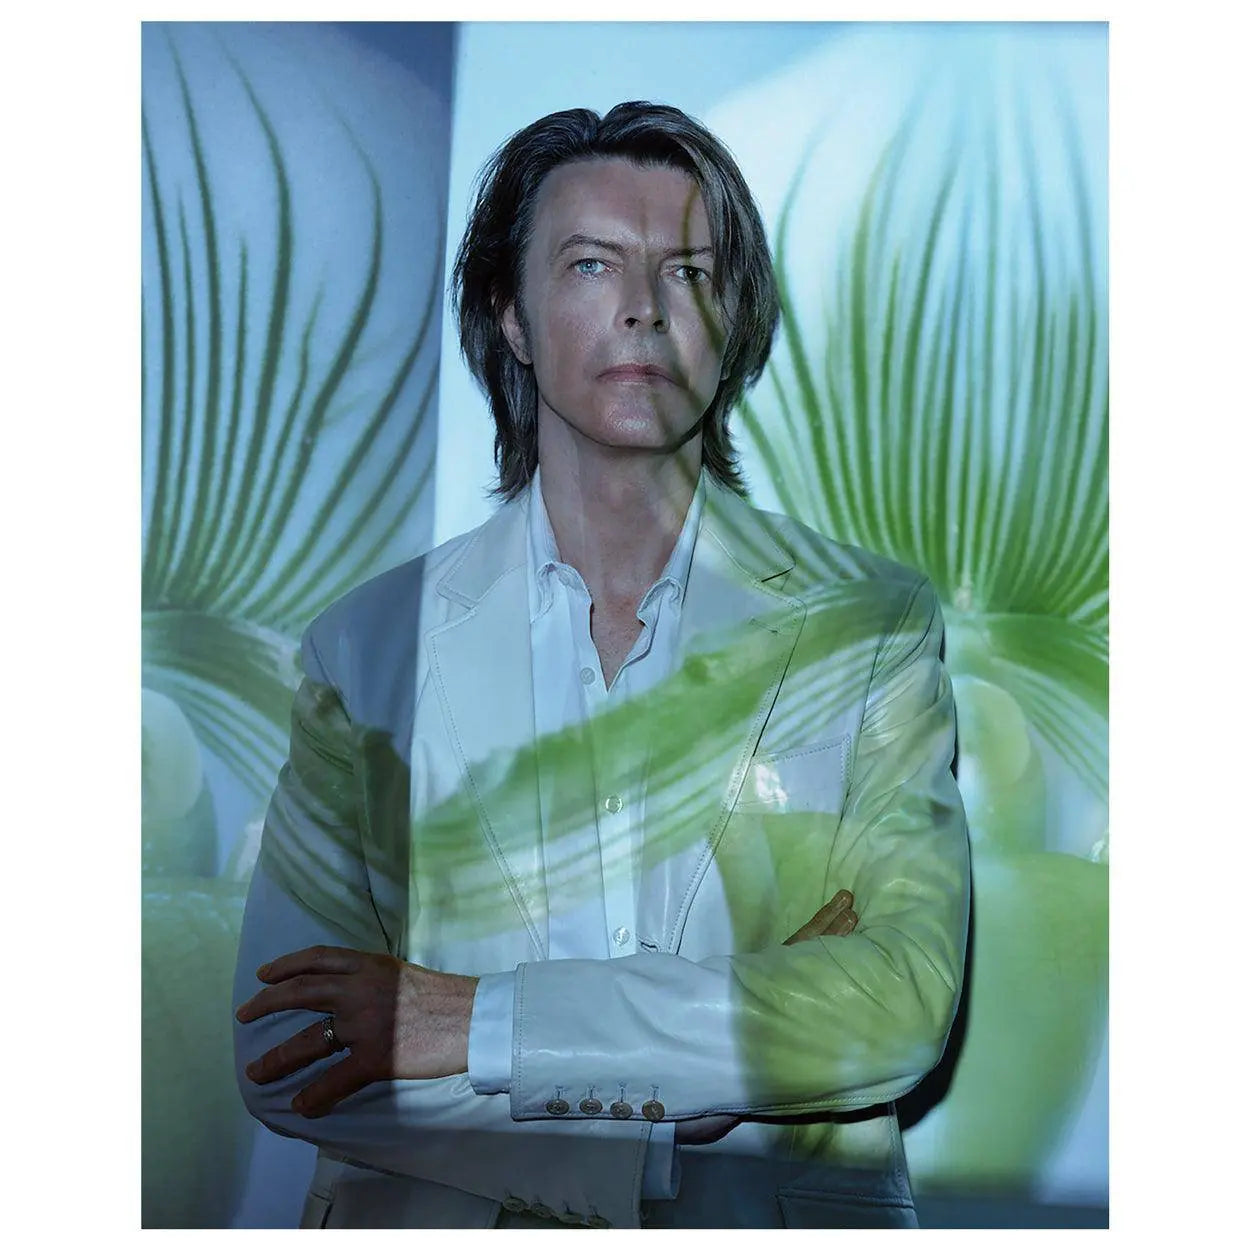 Tim Bret Day - David Bowie - Mini prints from Hours album shoot - JG Contemporary 